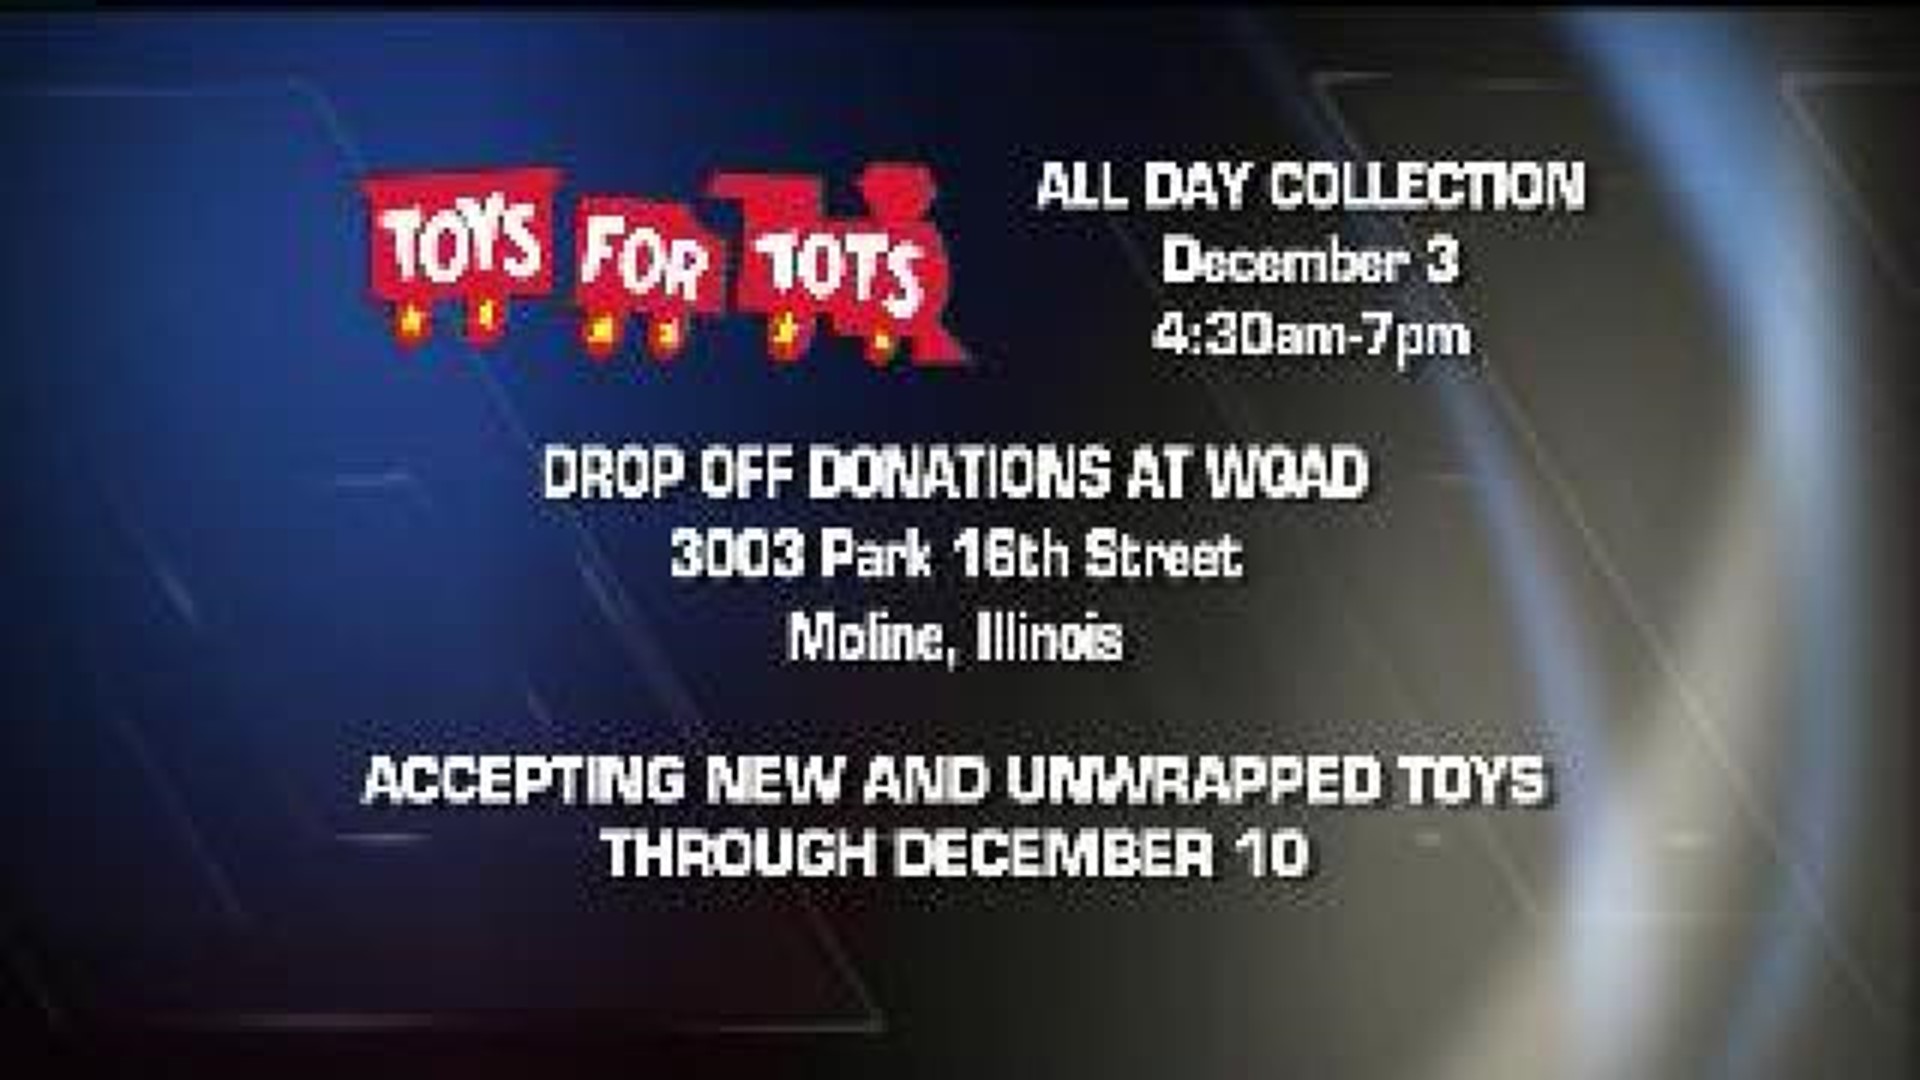 Toys for Tots Drop-Off